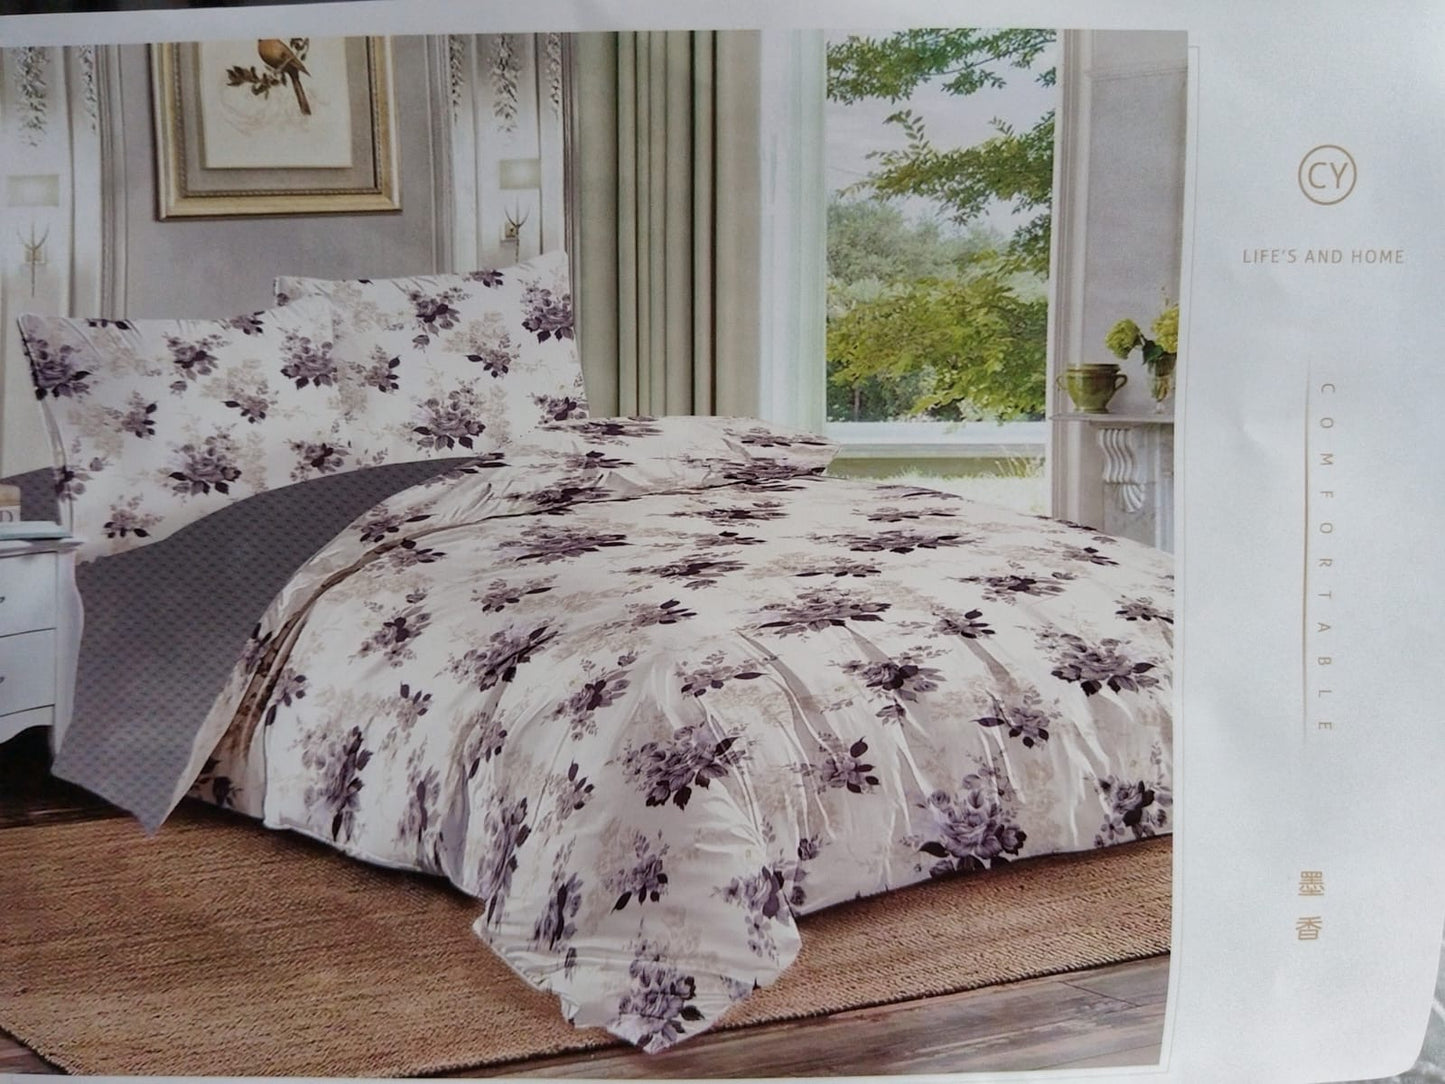 Light weight bedspread for Summer season - AC Quilt 6 pieces set - 220 x 240cm king size